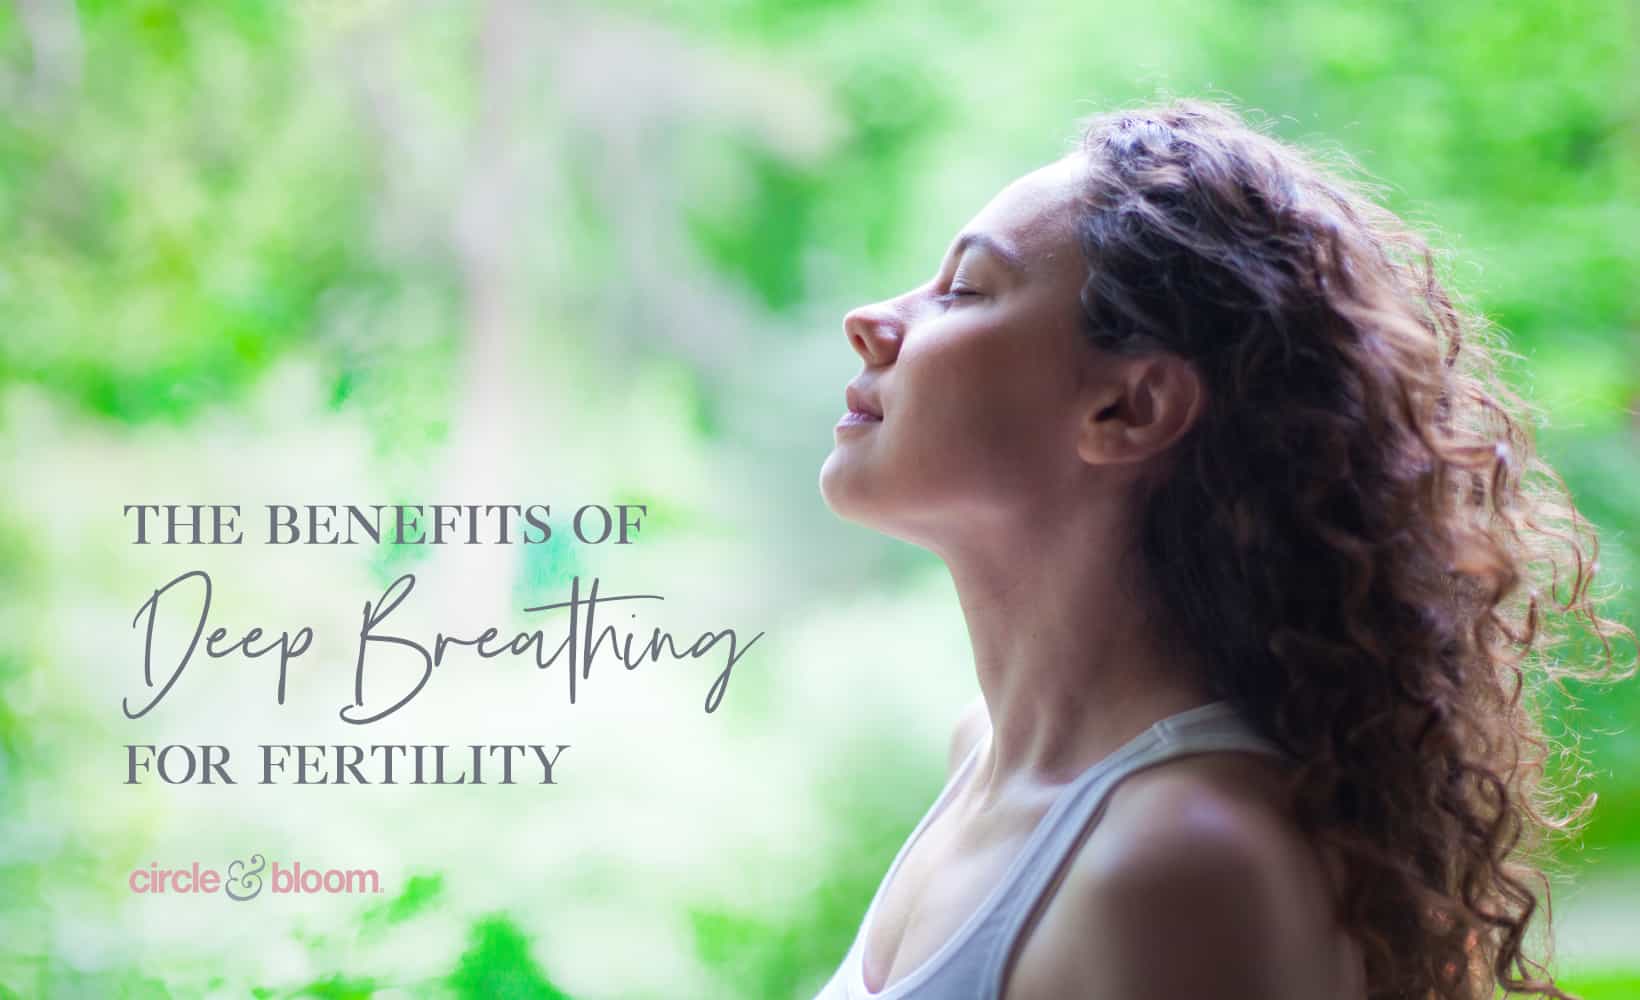 The Benefits of Deep Breathing for Fertility